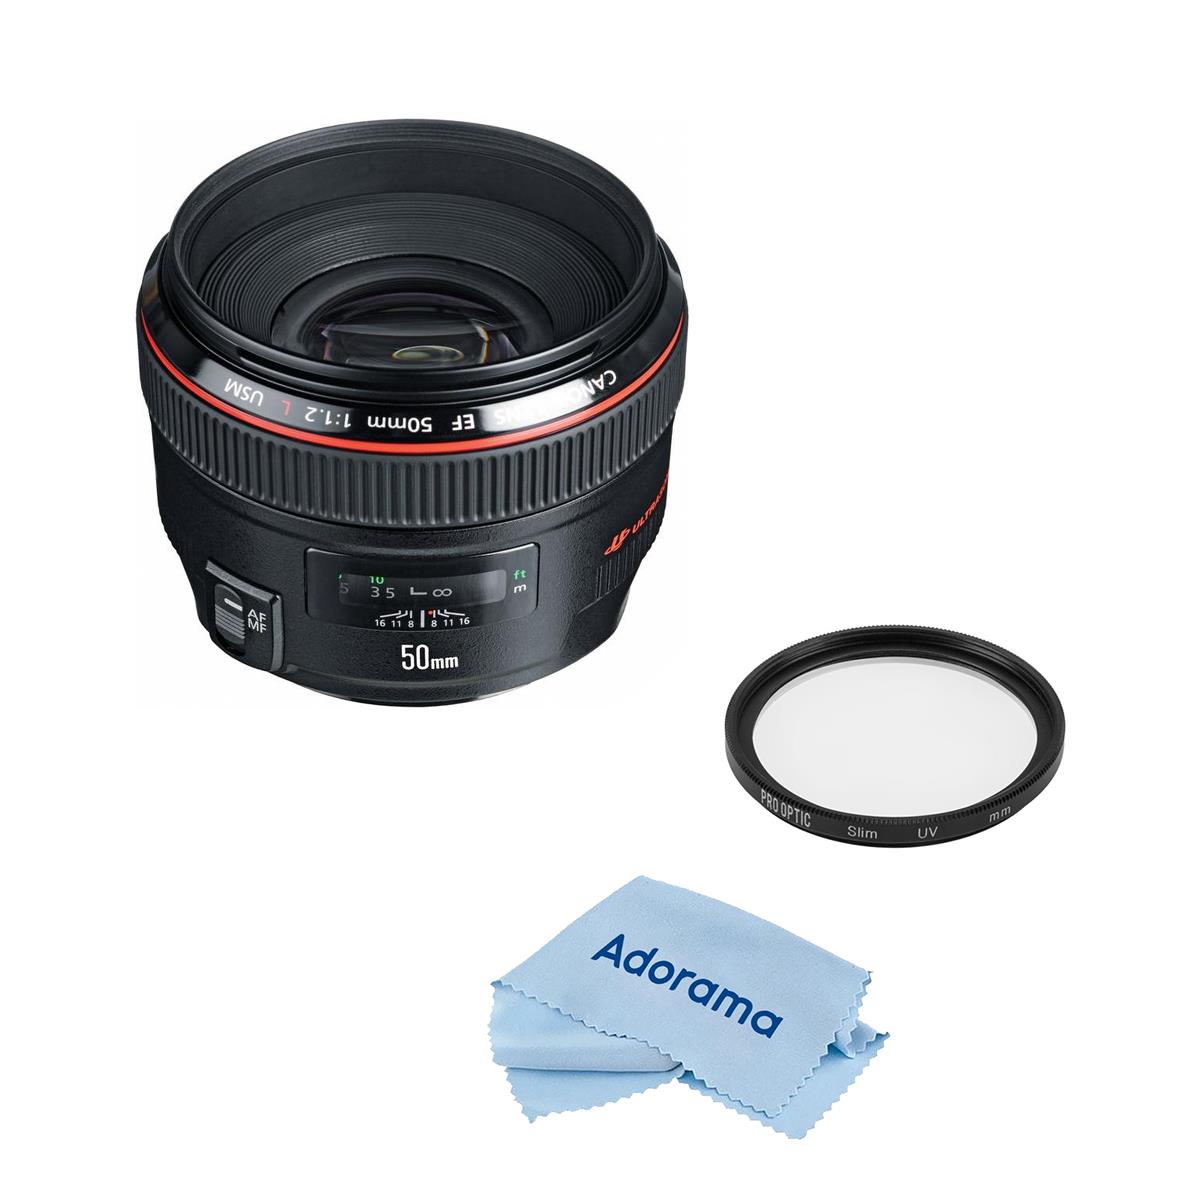 Image of Canon EF 50mm f/1.2L USM Lens with Accessories Kit